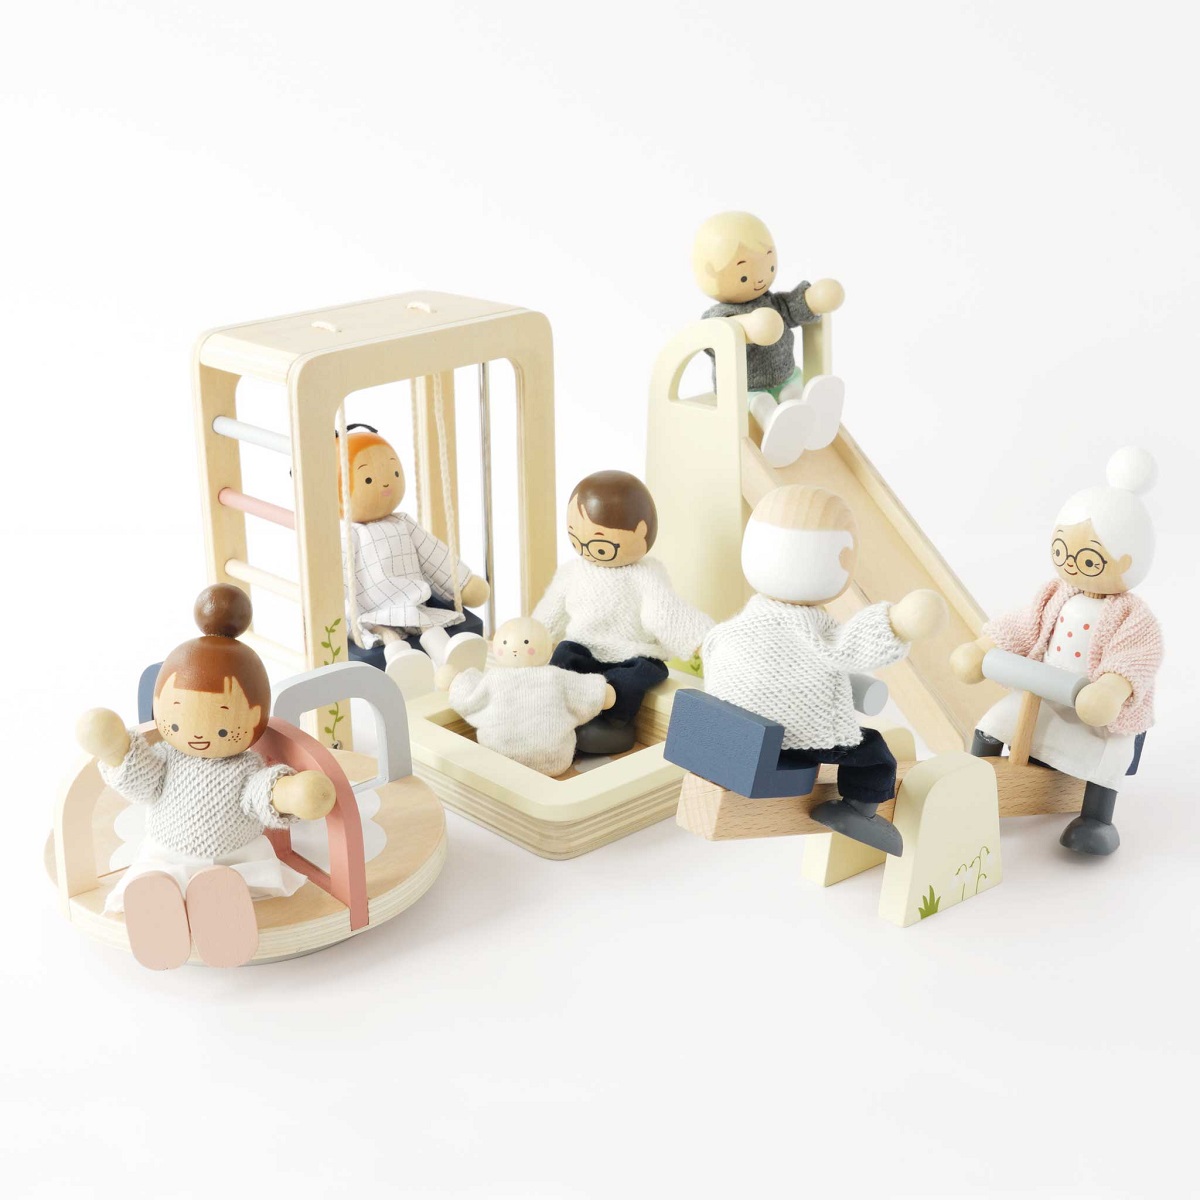 Doll House Furniture - Outdoor Play